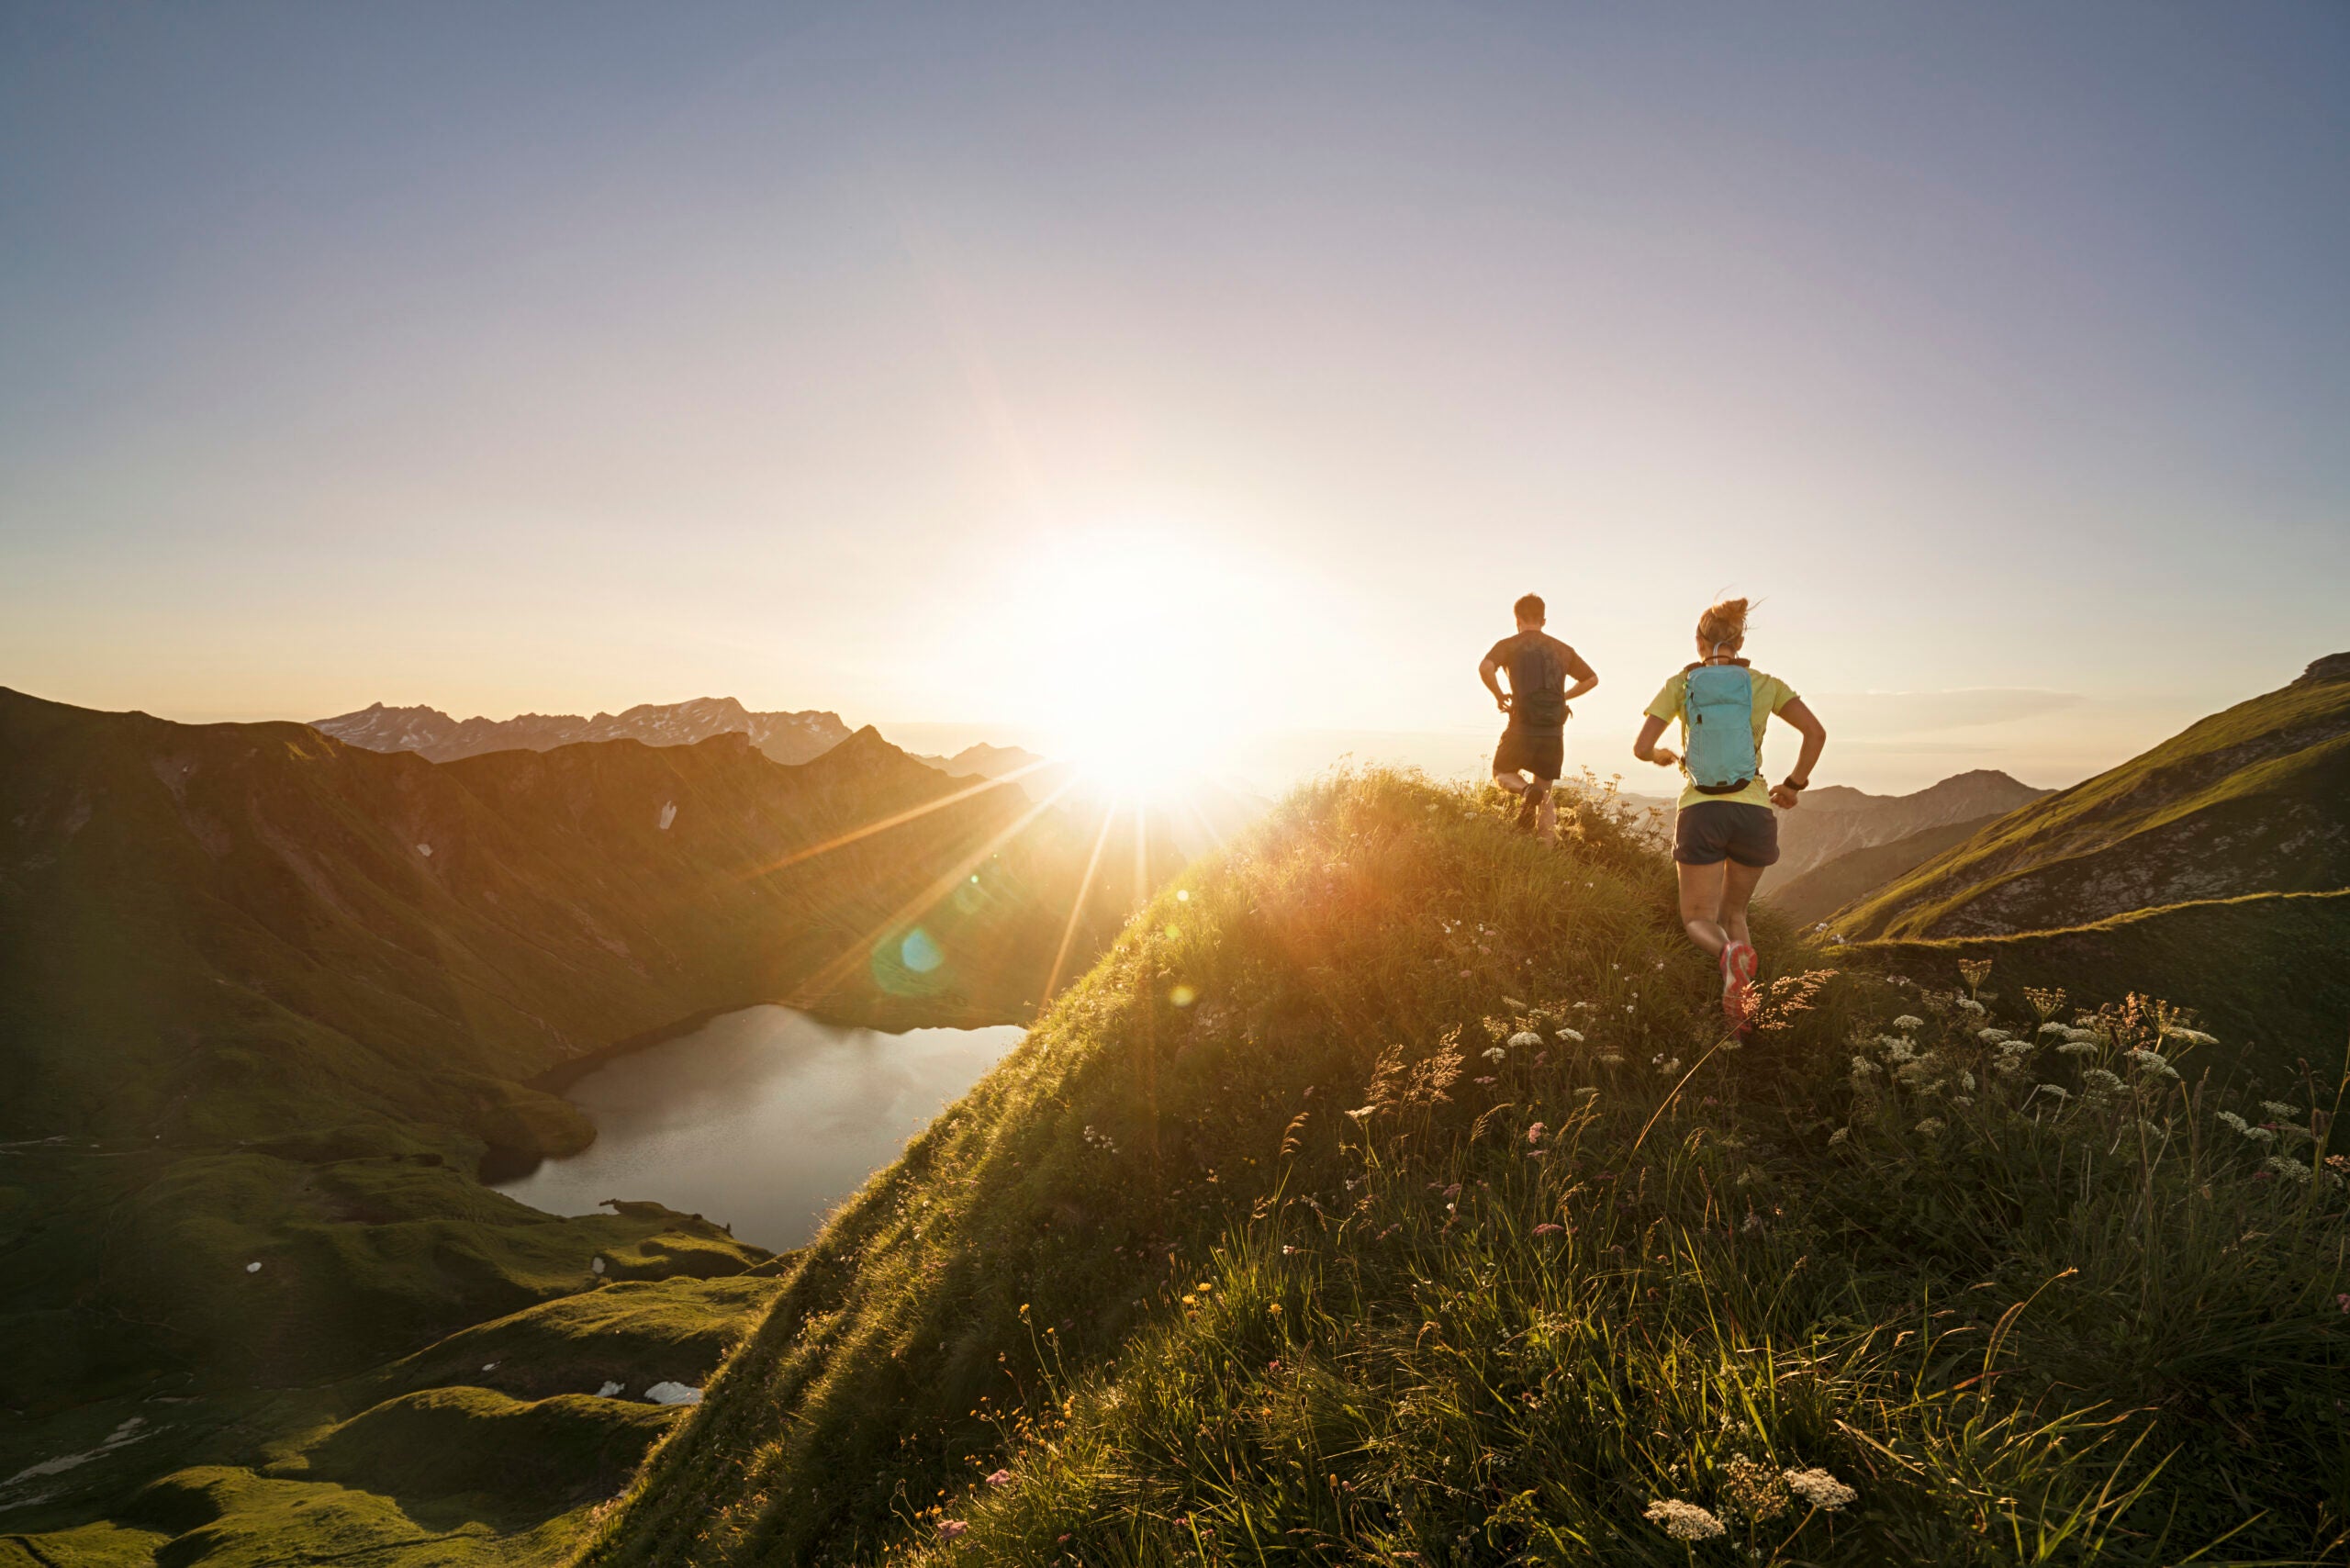 Germany, Allgaeu Alps, man and woman running on mountain trail.